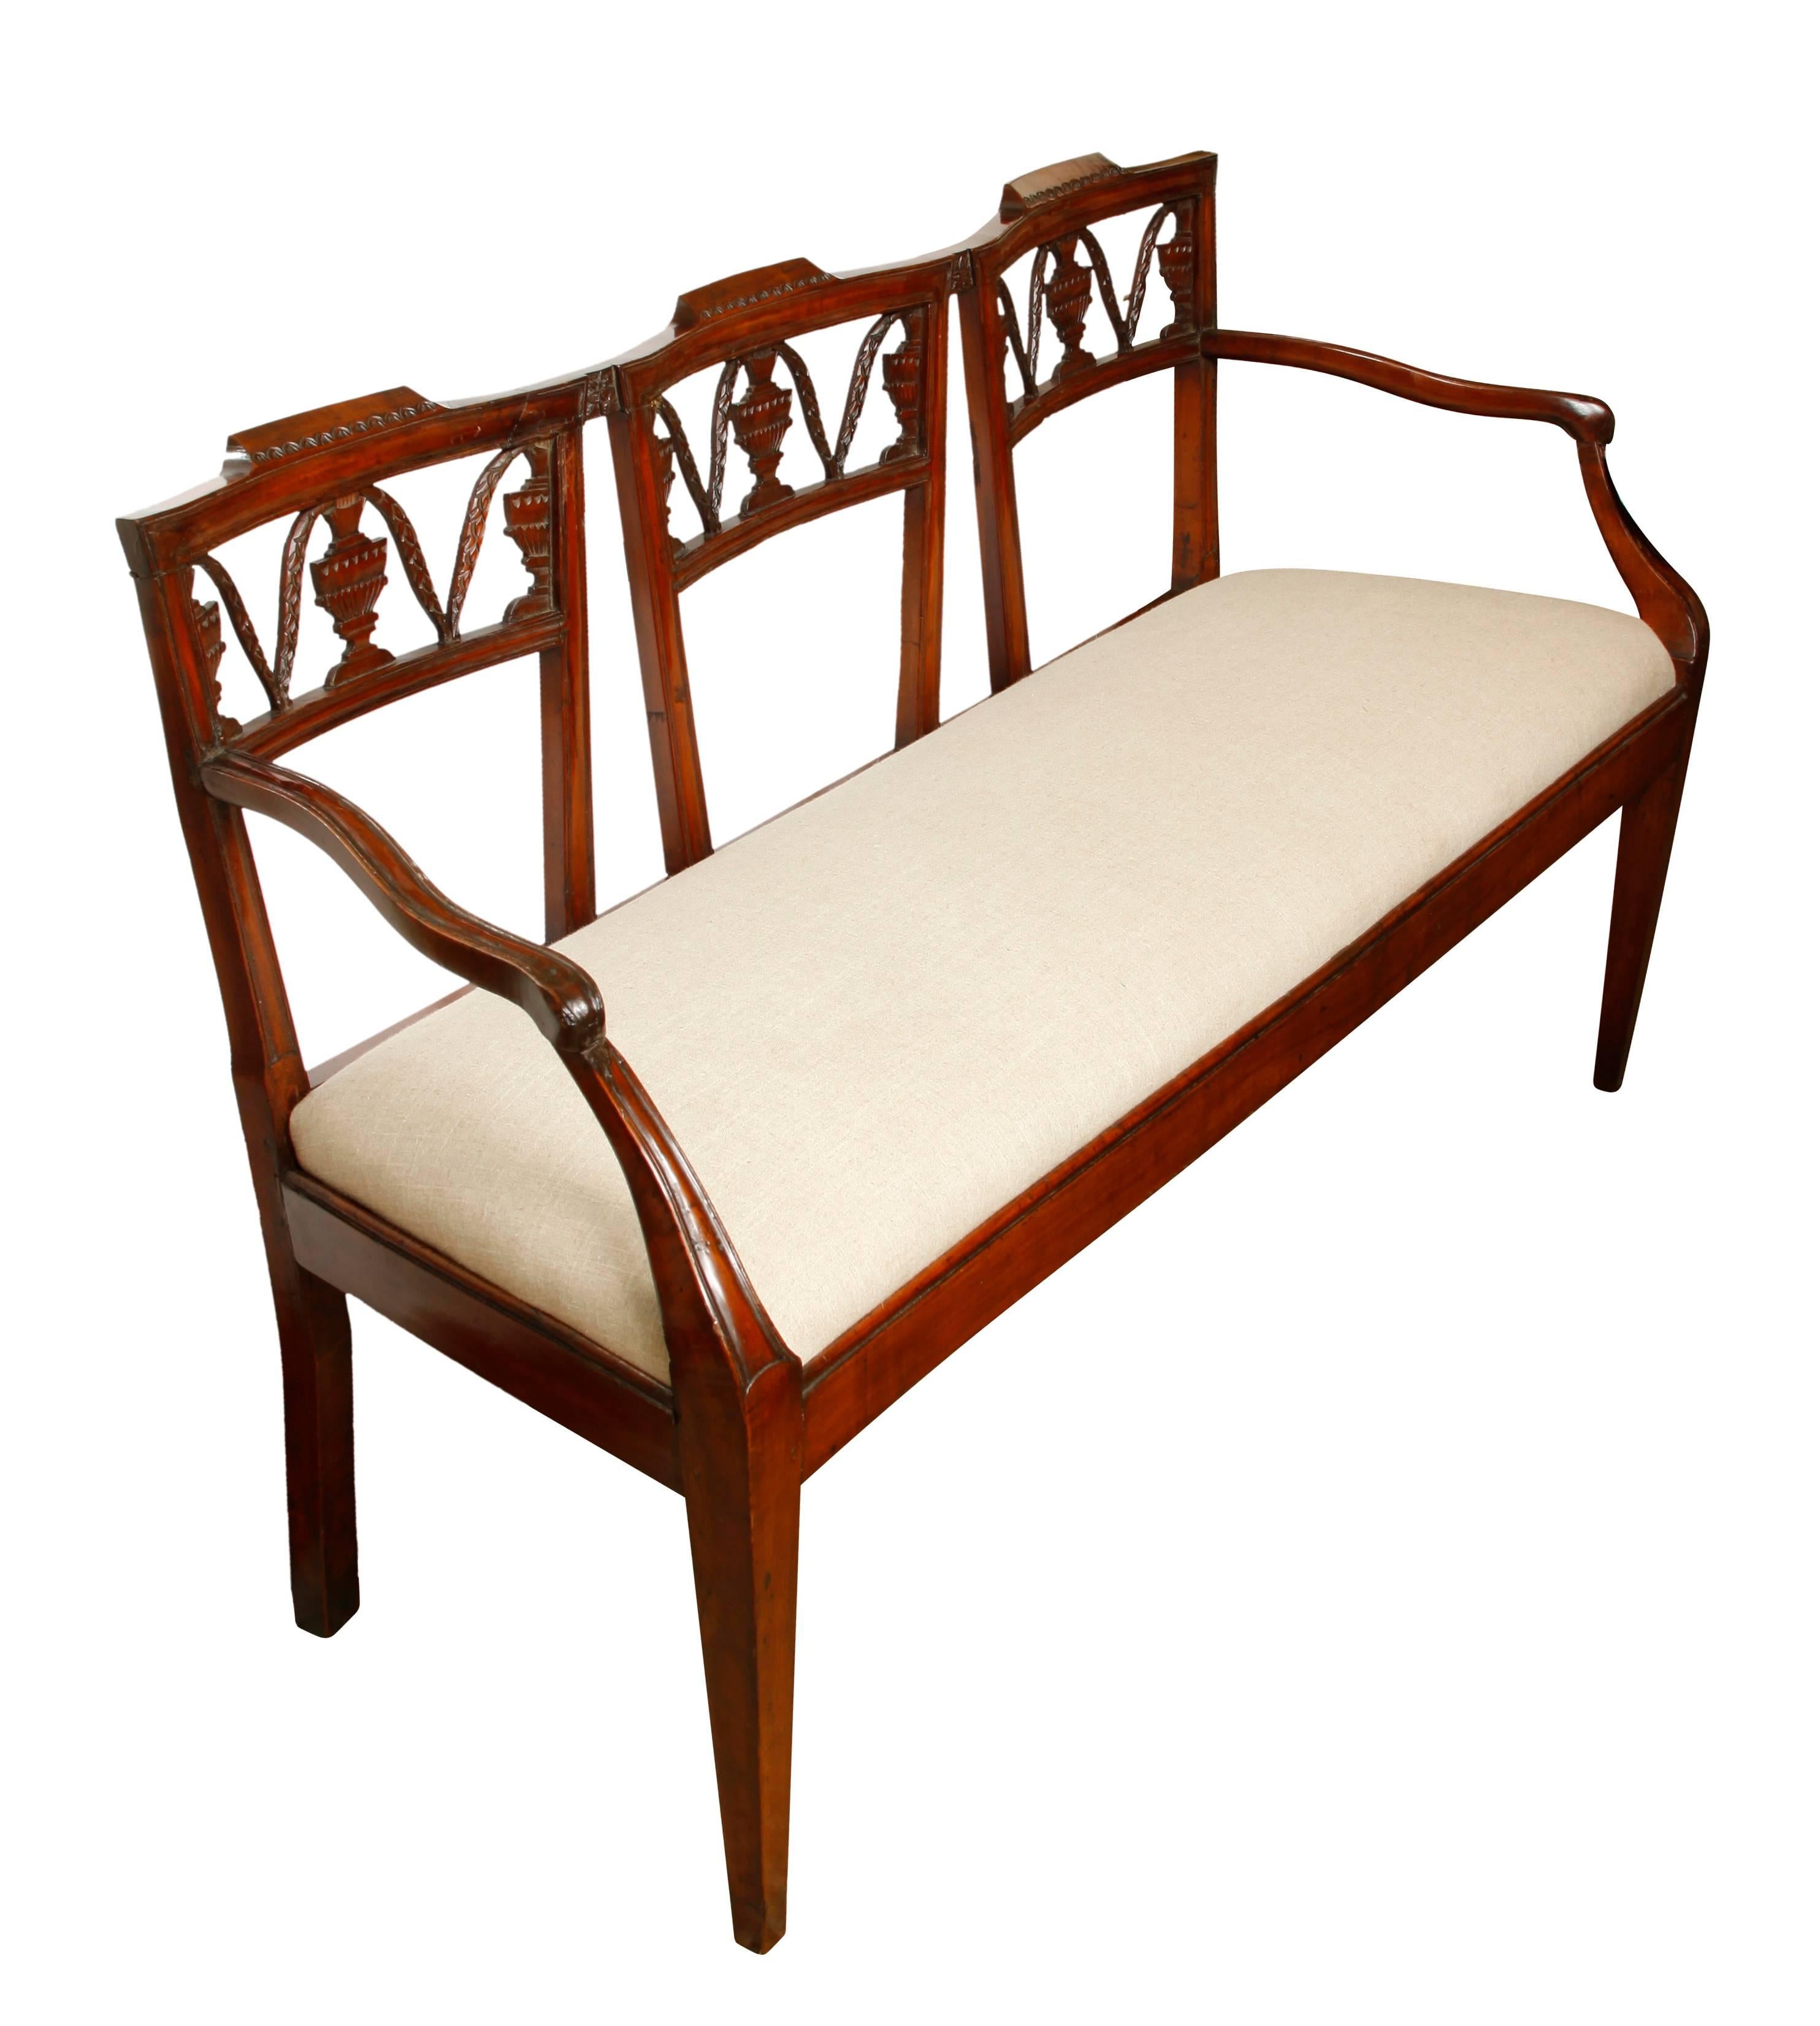 A mahogany hall bench of exceptional style and quality. The open back consists of three sections, beautifully decoration with hand-carved neoclassical details, and slightly curved at top. The arms have an elegant, slightly serpentine shape, and the